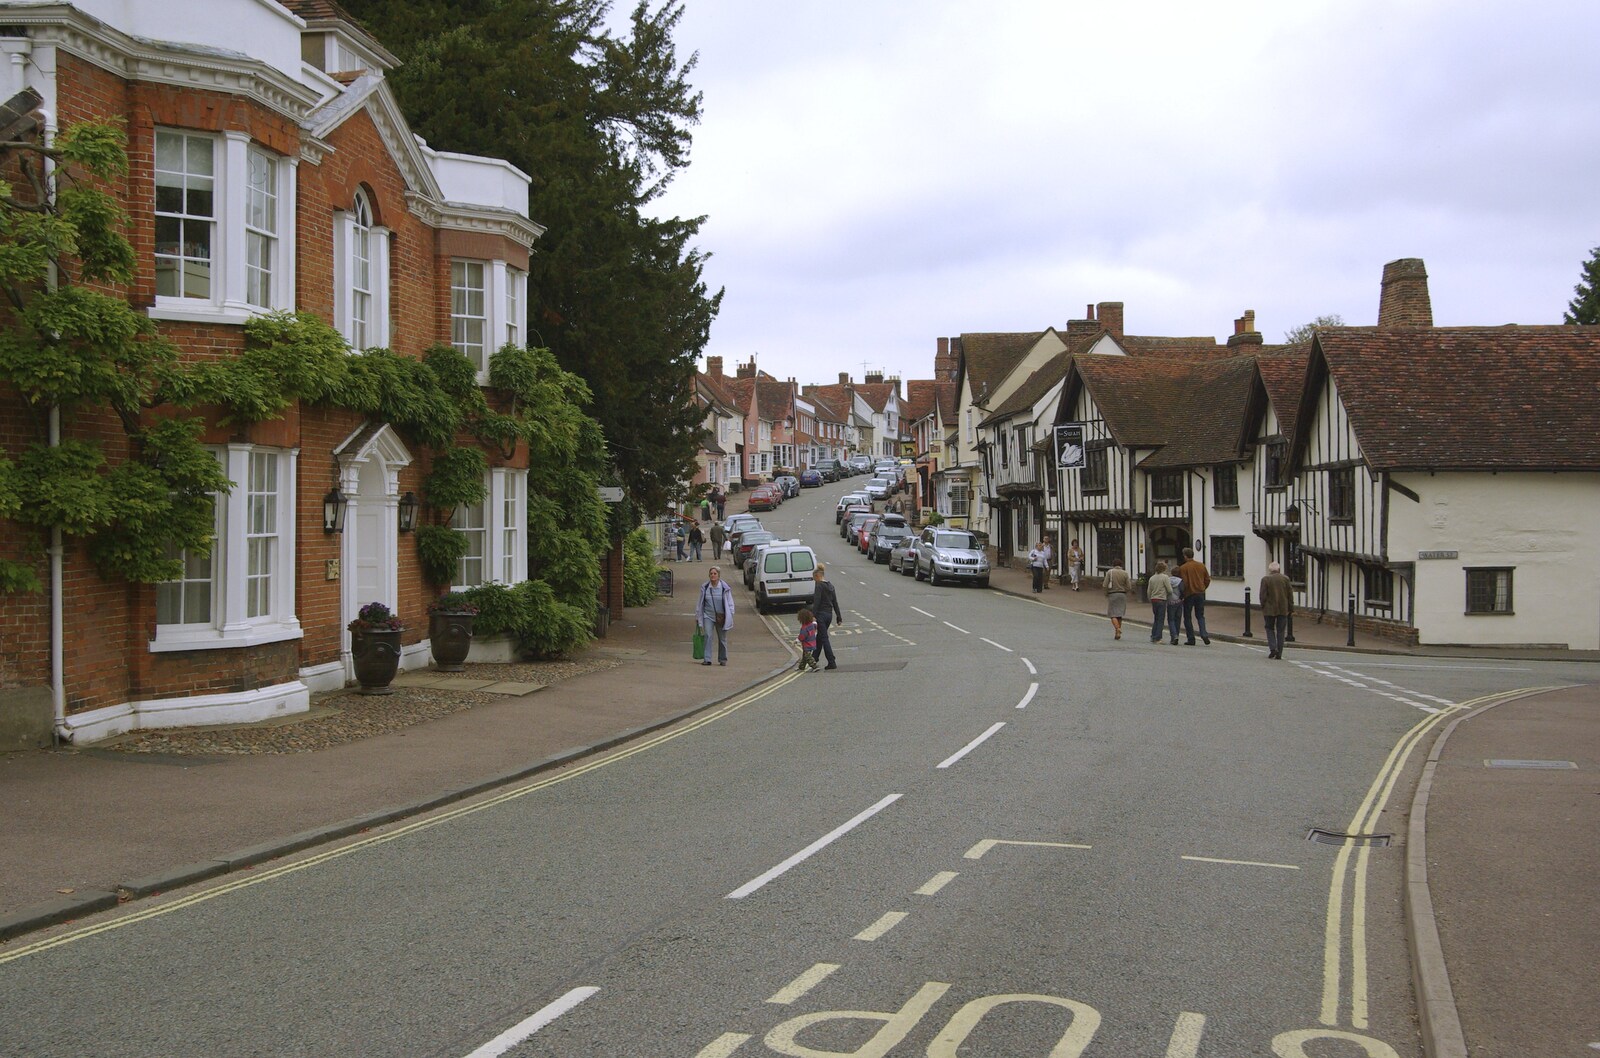 A Road Trip in an MX-5, and Athlete at the UEA, Lavenham and Norwich - 14th October 2007: The main street through Lavenham